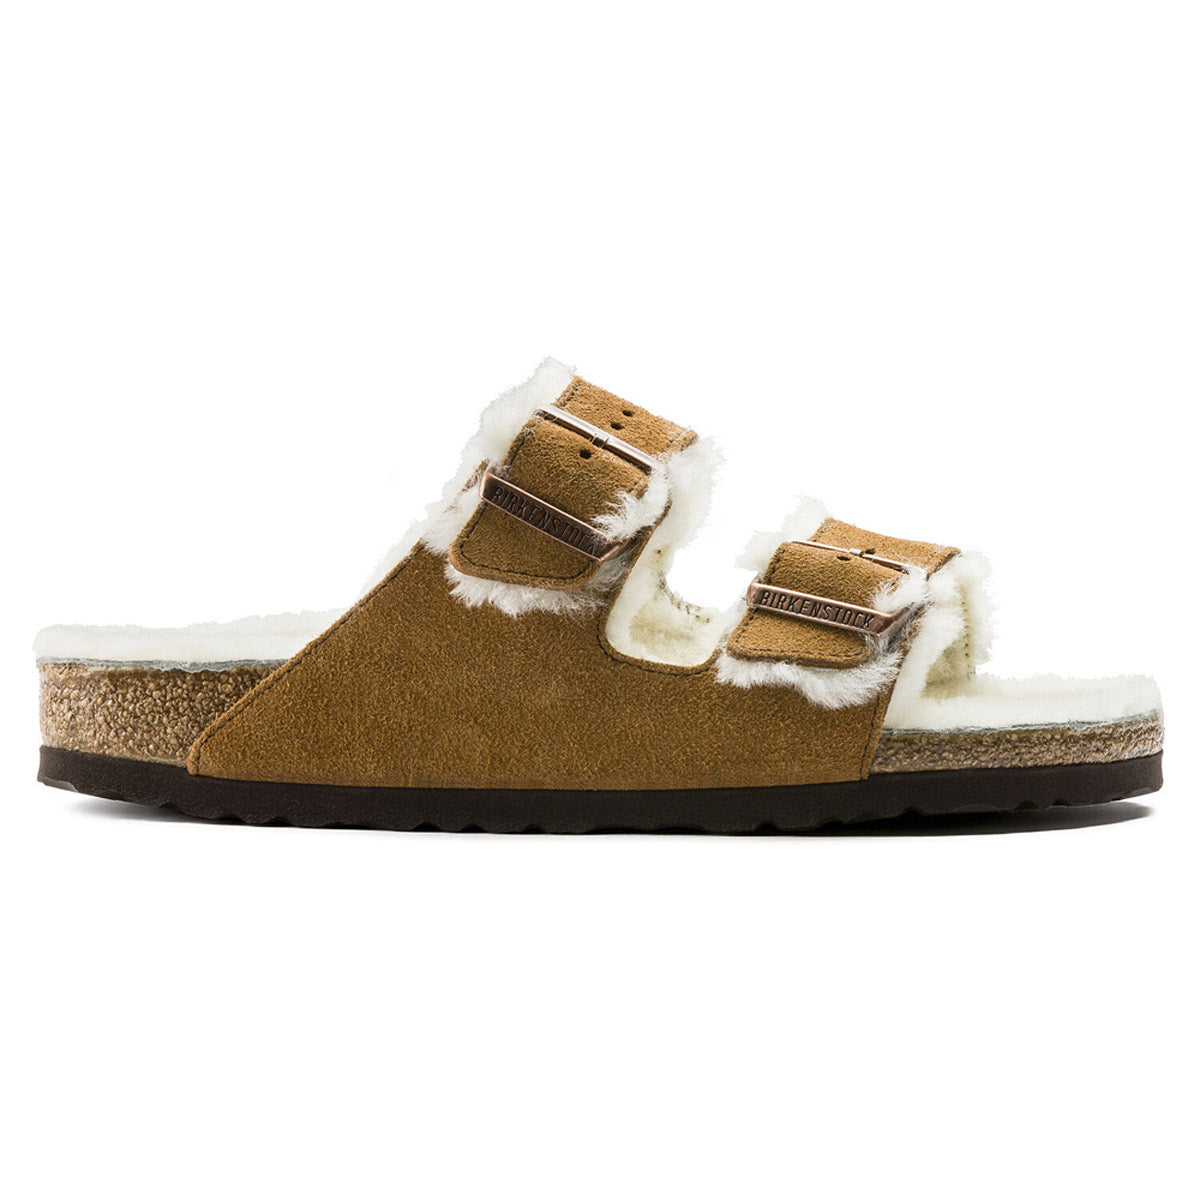 Furry brown Birkenstock Arizona Shearling Mink sandal with two adjustable straps and a white lining on a white background.